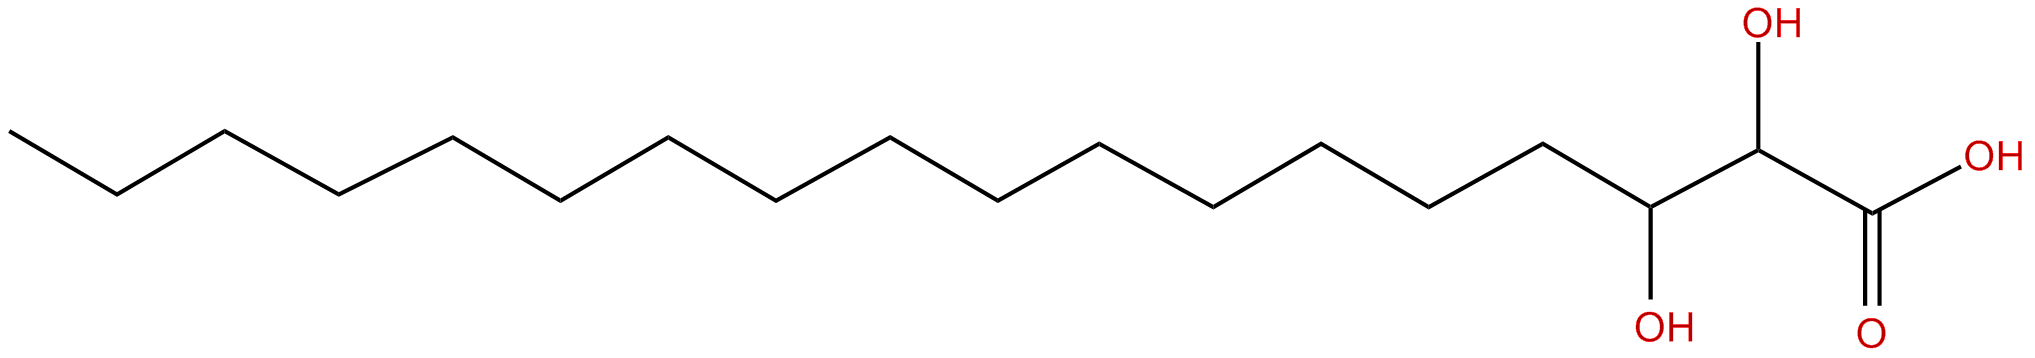 Image of 2,3-dihydroxystearic acid